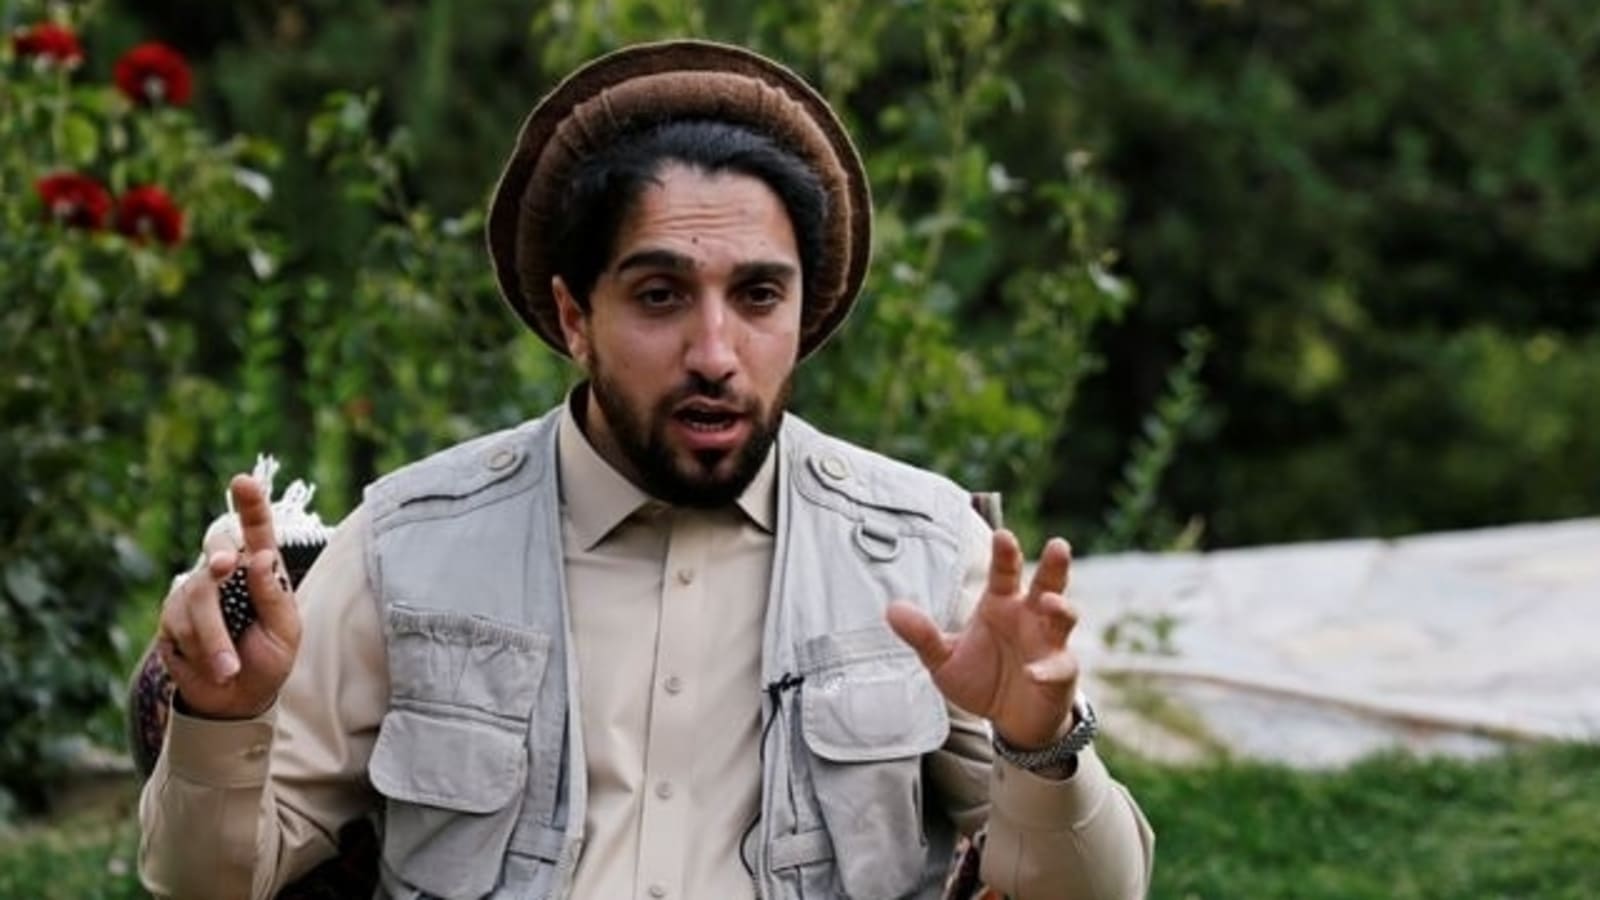 Battle for Panjshir: How Ahmad Massoud's forces were able to fight